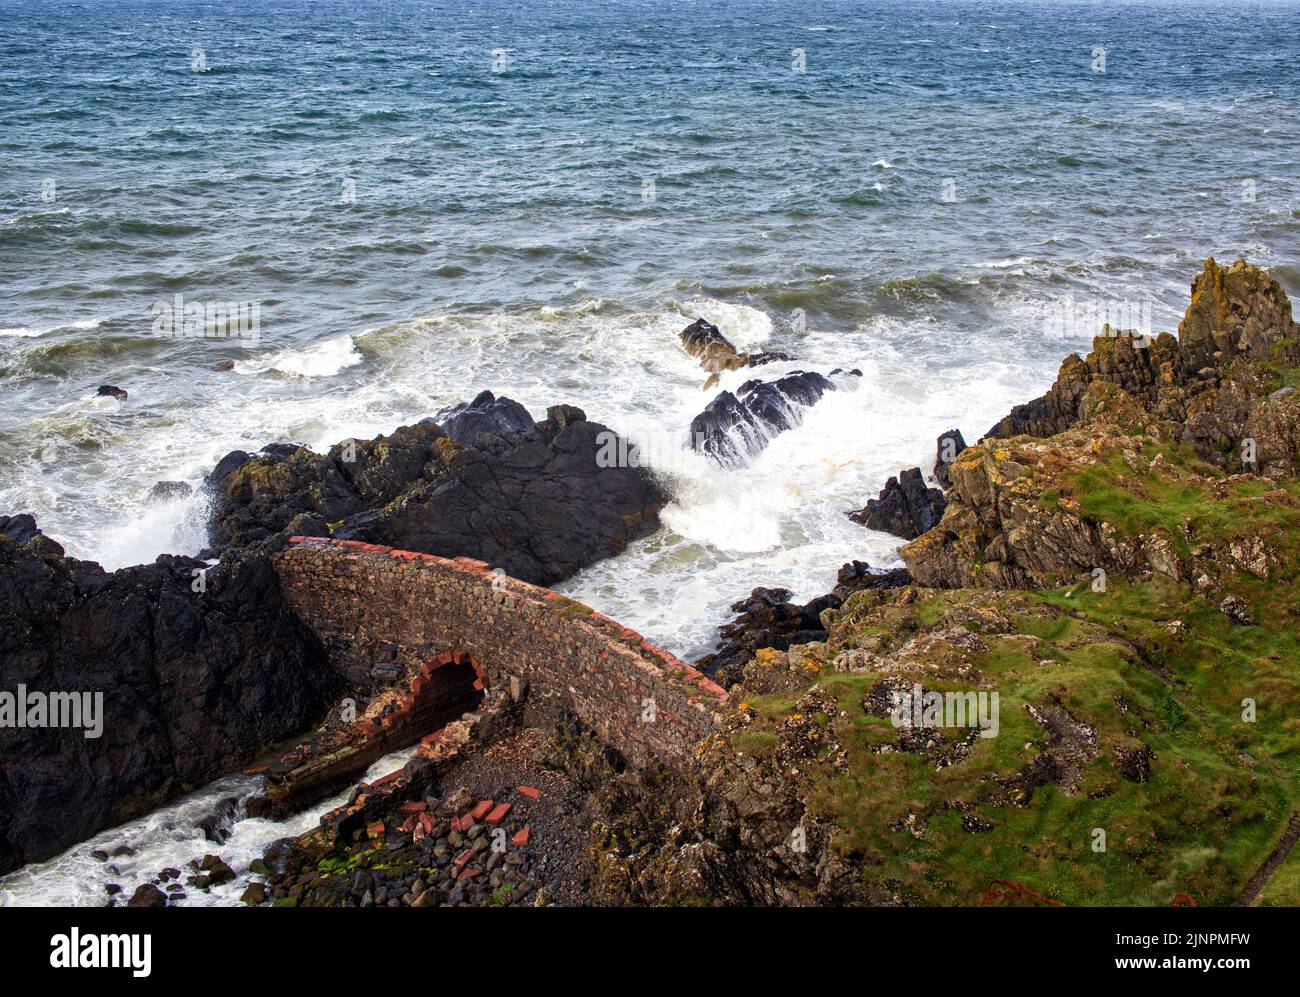 Looking down on the edge of the coast at Portpatrick, Stranraer, Scotland. Stock Photo